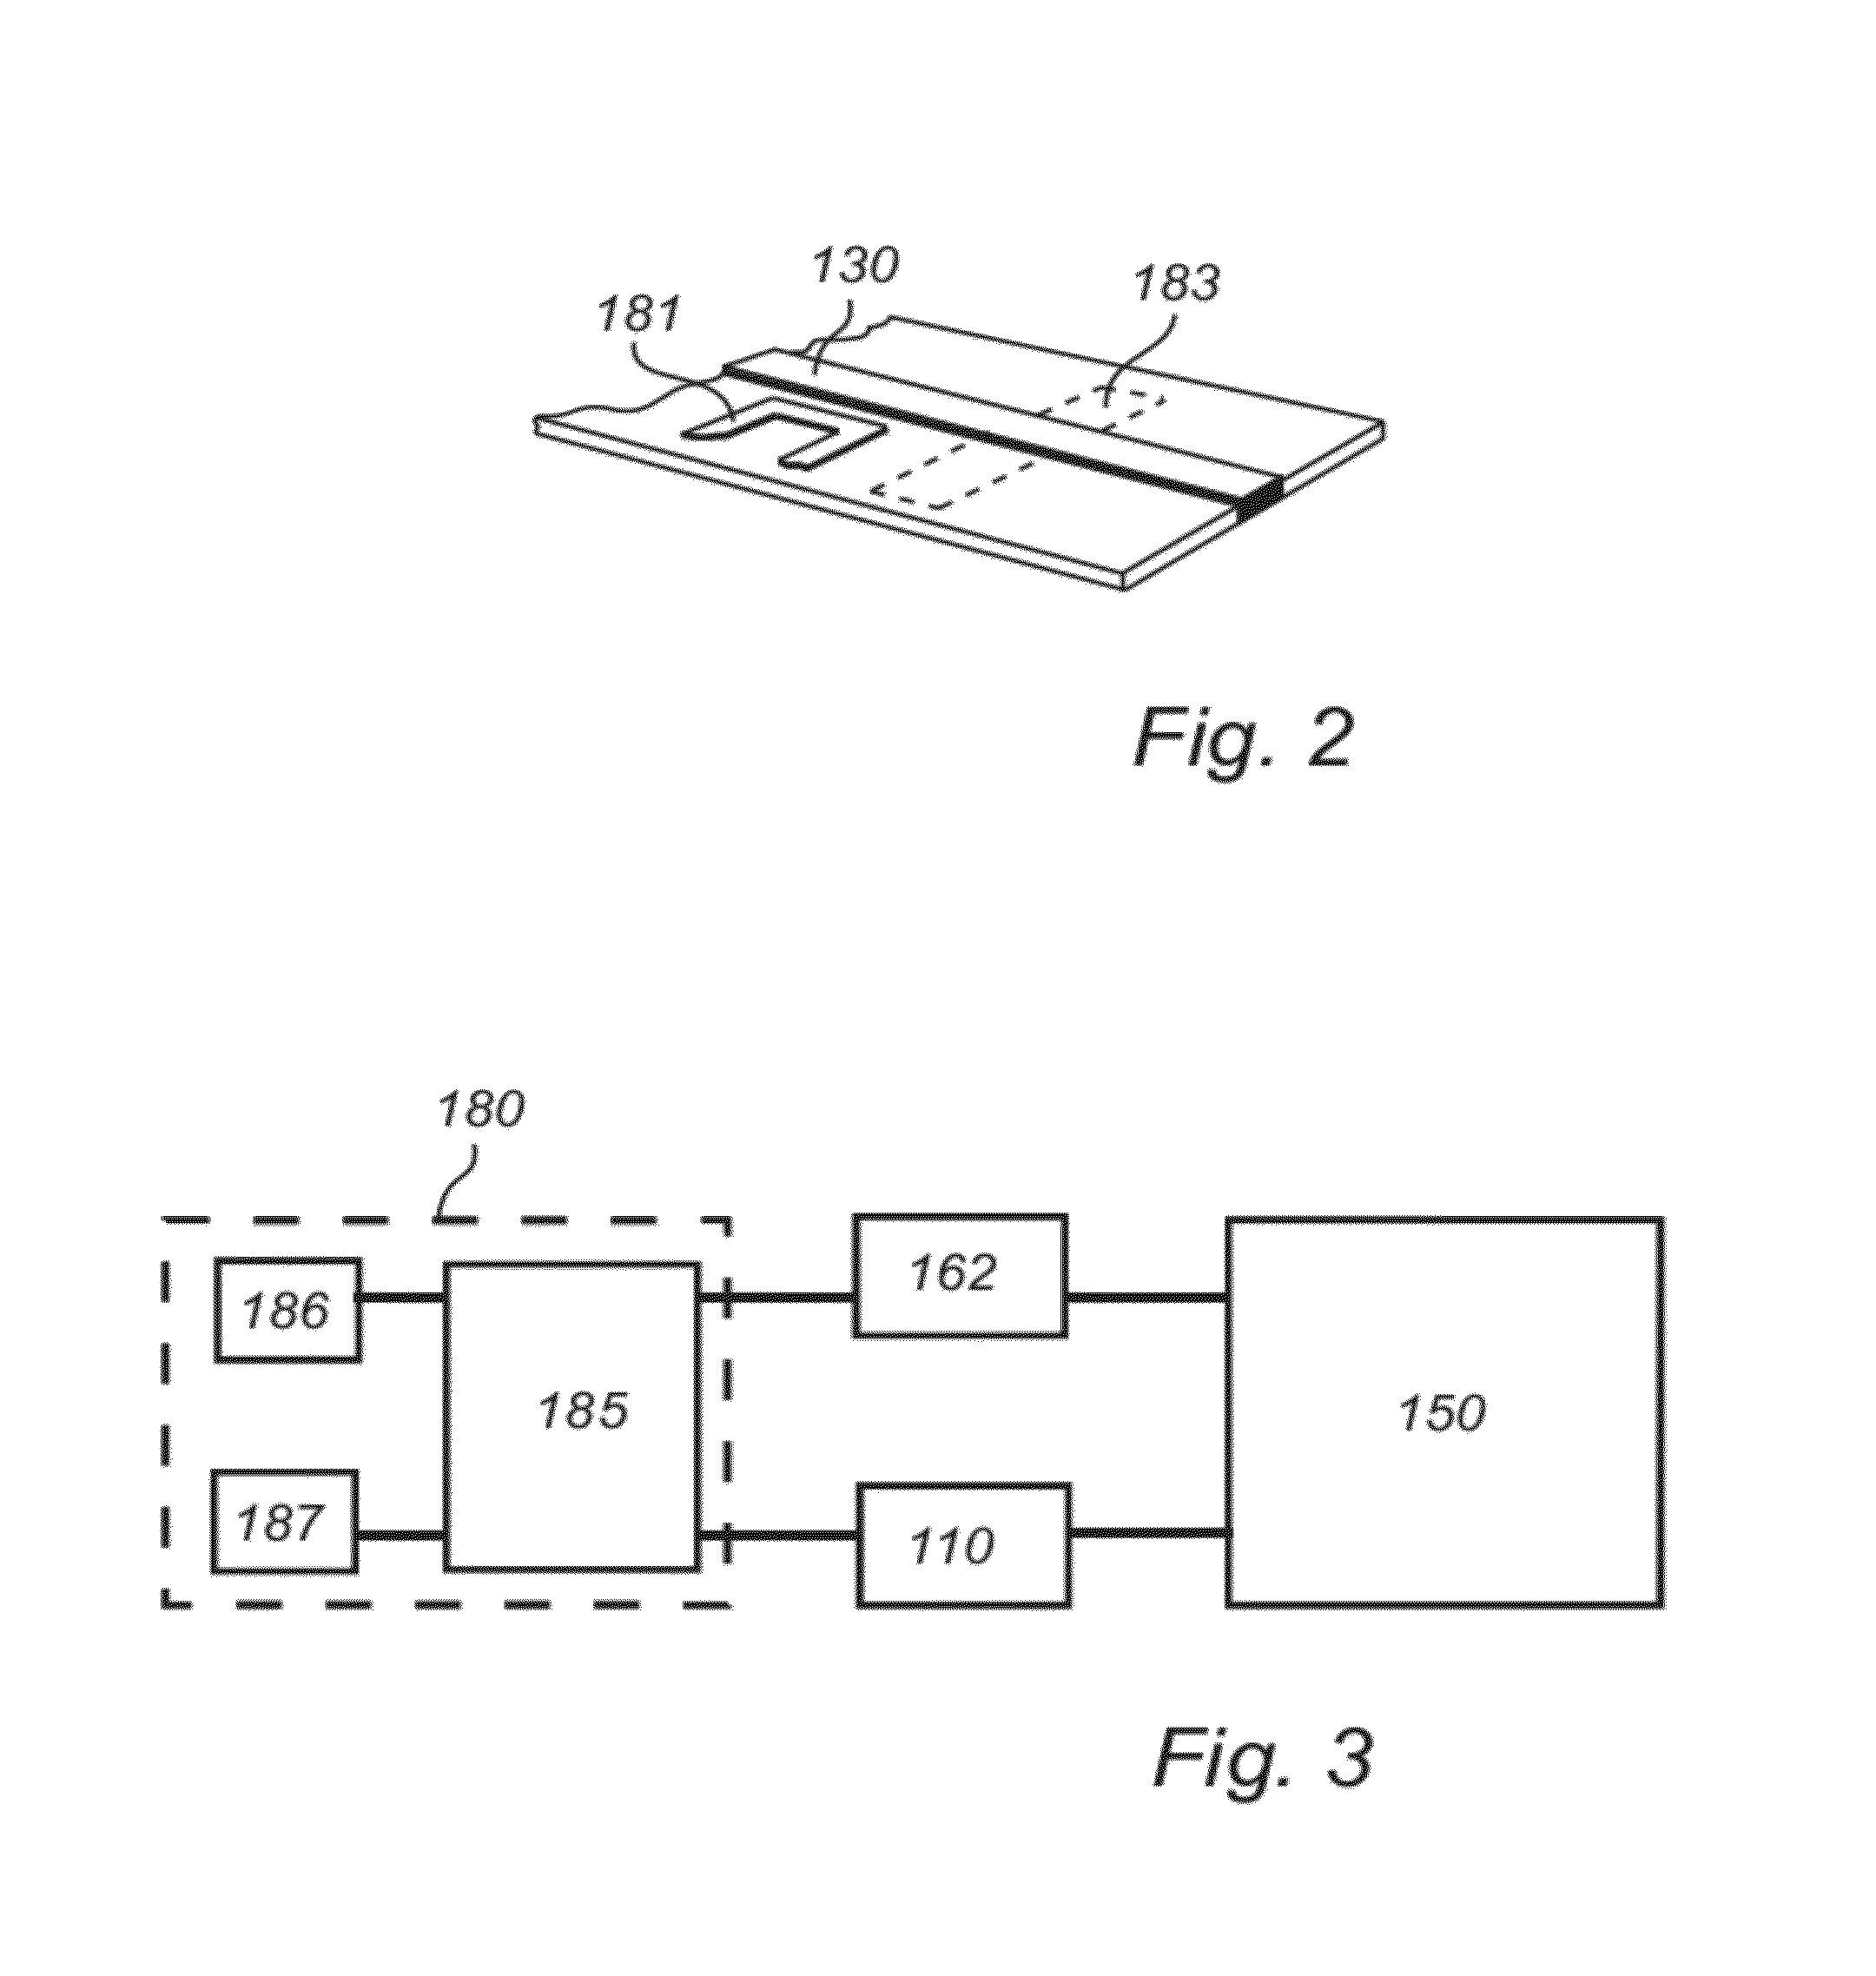 Microwave oven switching between predefined modes